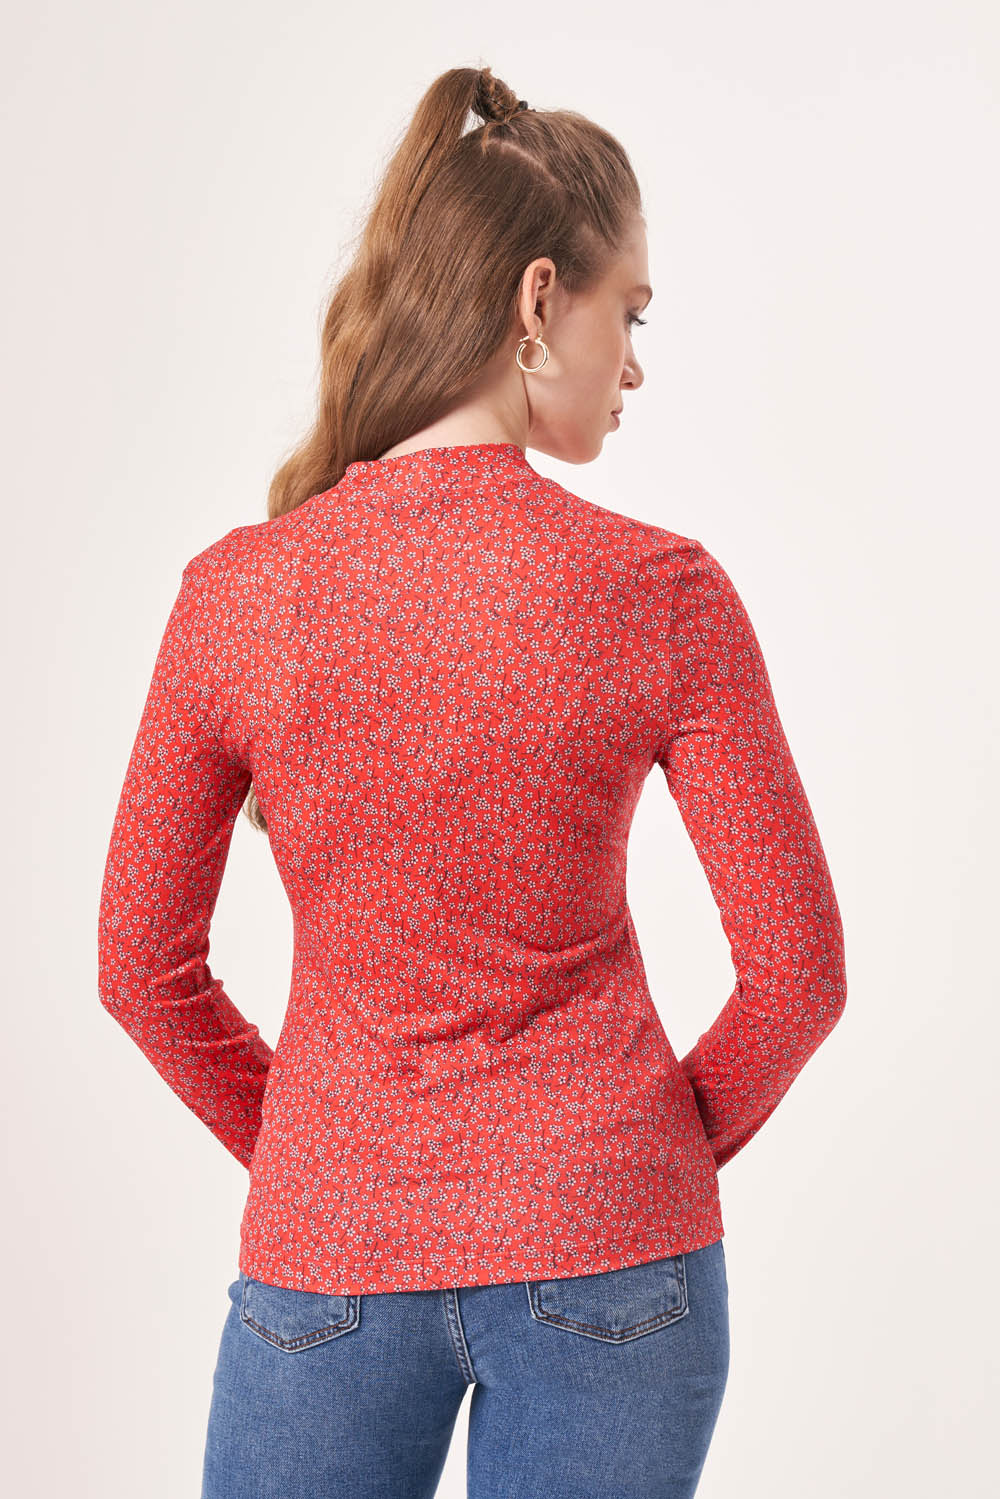 Patterned Long Sleeve Red Body